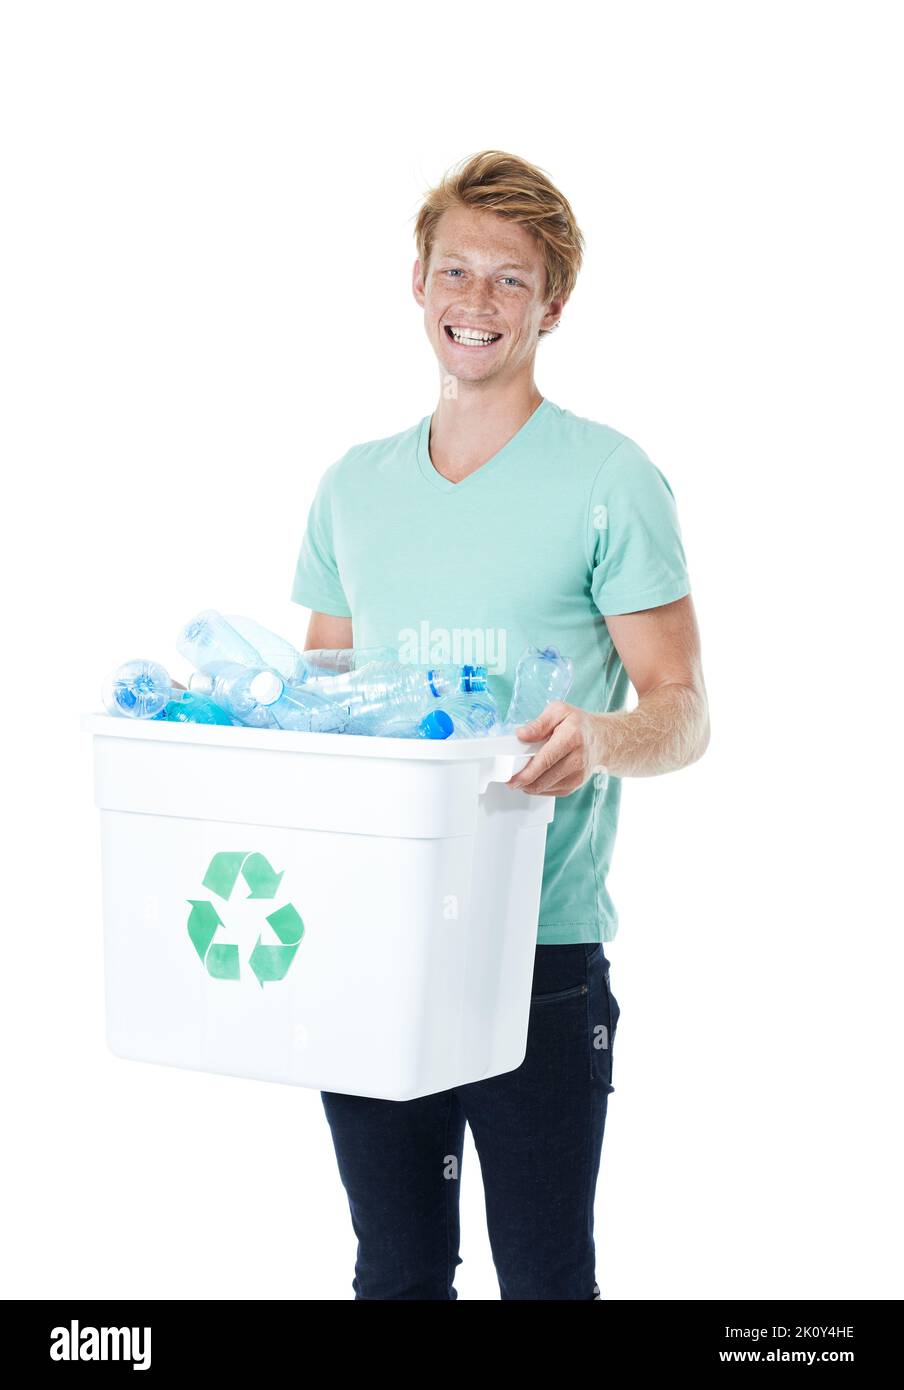 https://c8.alamy.com/comp/2K0Y4HE/take-the-time-to-recycle-a-happy-young-red-headed-man-holding-a-recycling-bin-filled-with-empty-plastic-bottles-2K0Y4HE.jpg